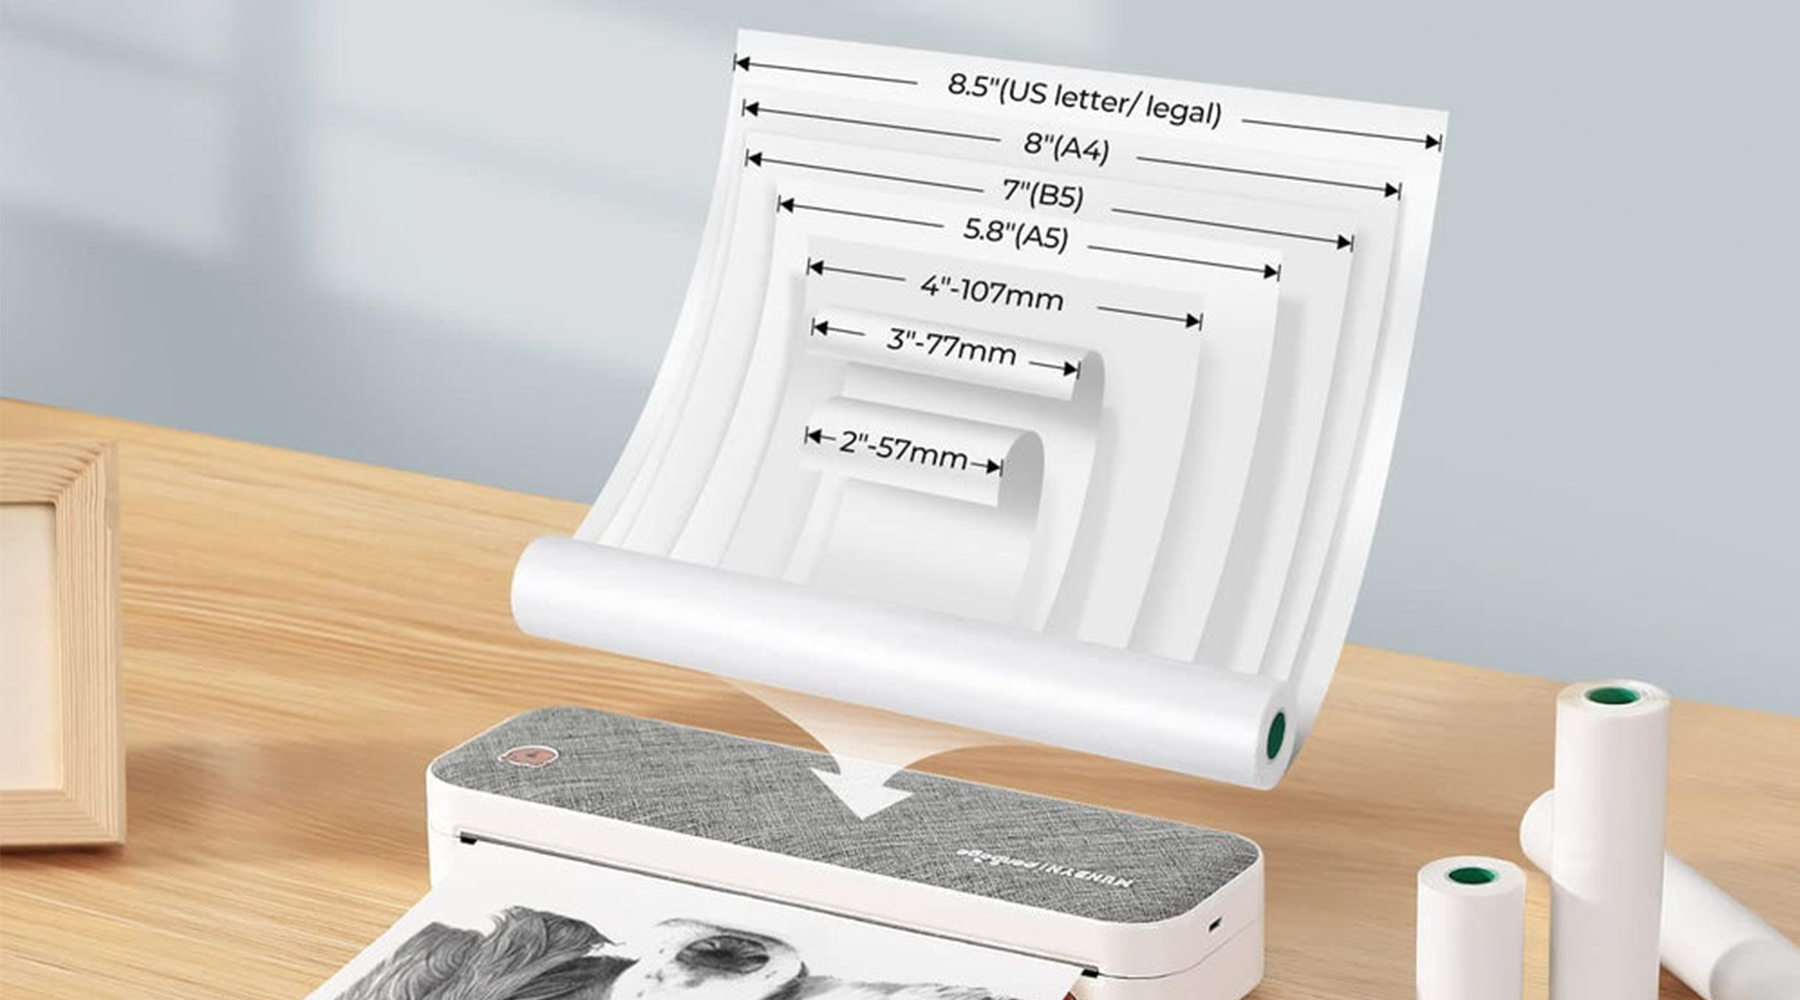 How to convert A4 size photo paper 4x6 size photo paper 2023 